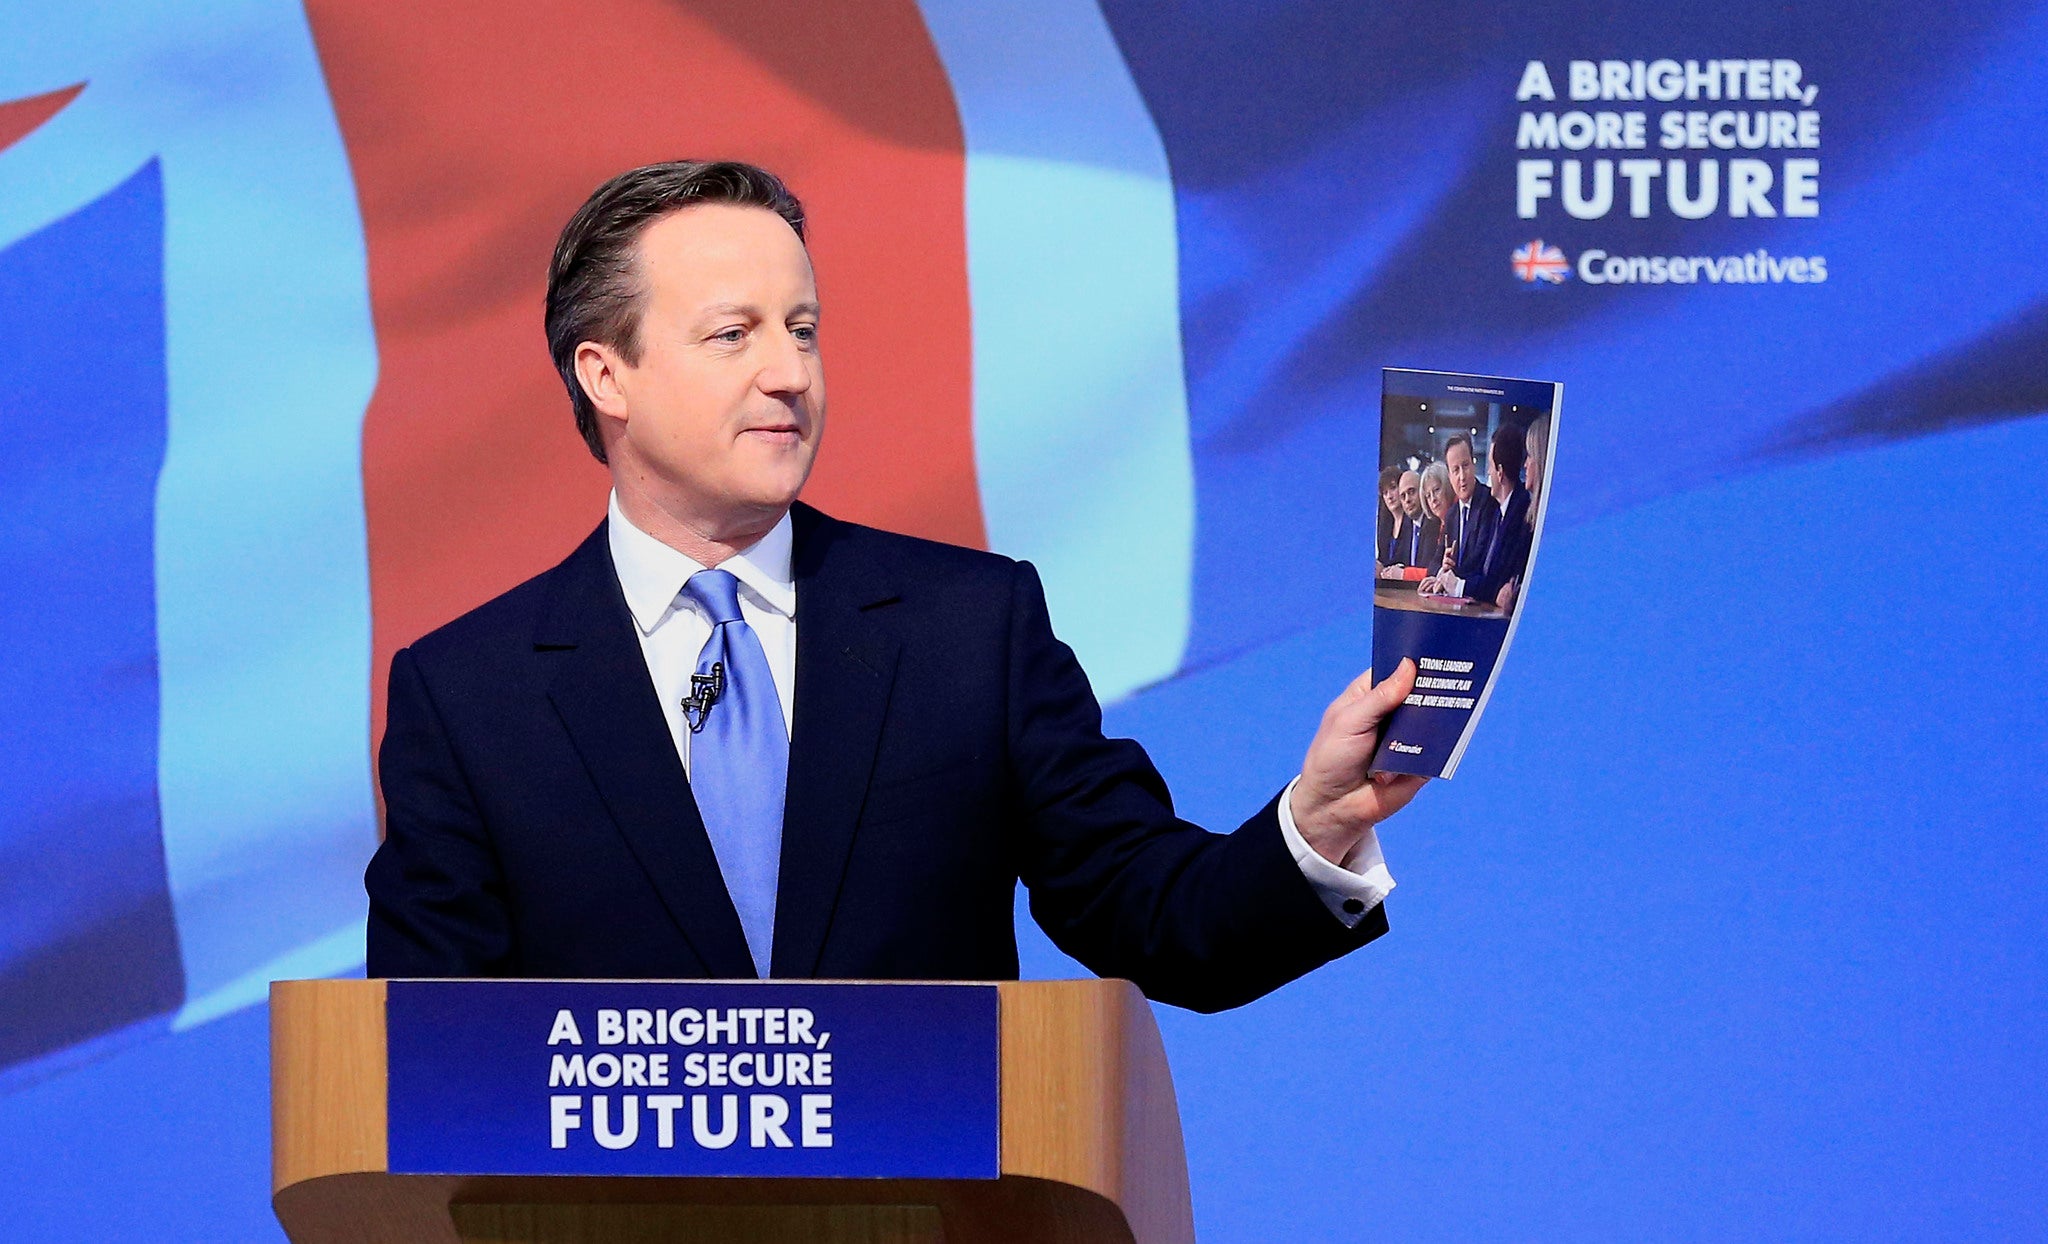 David Cameron pledged to repeal fox hunting ban in the Conservative party's election manifesto